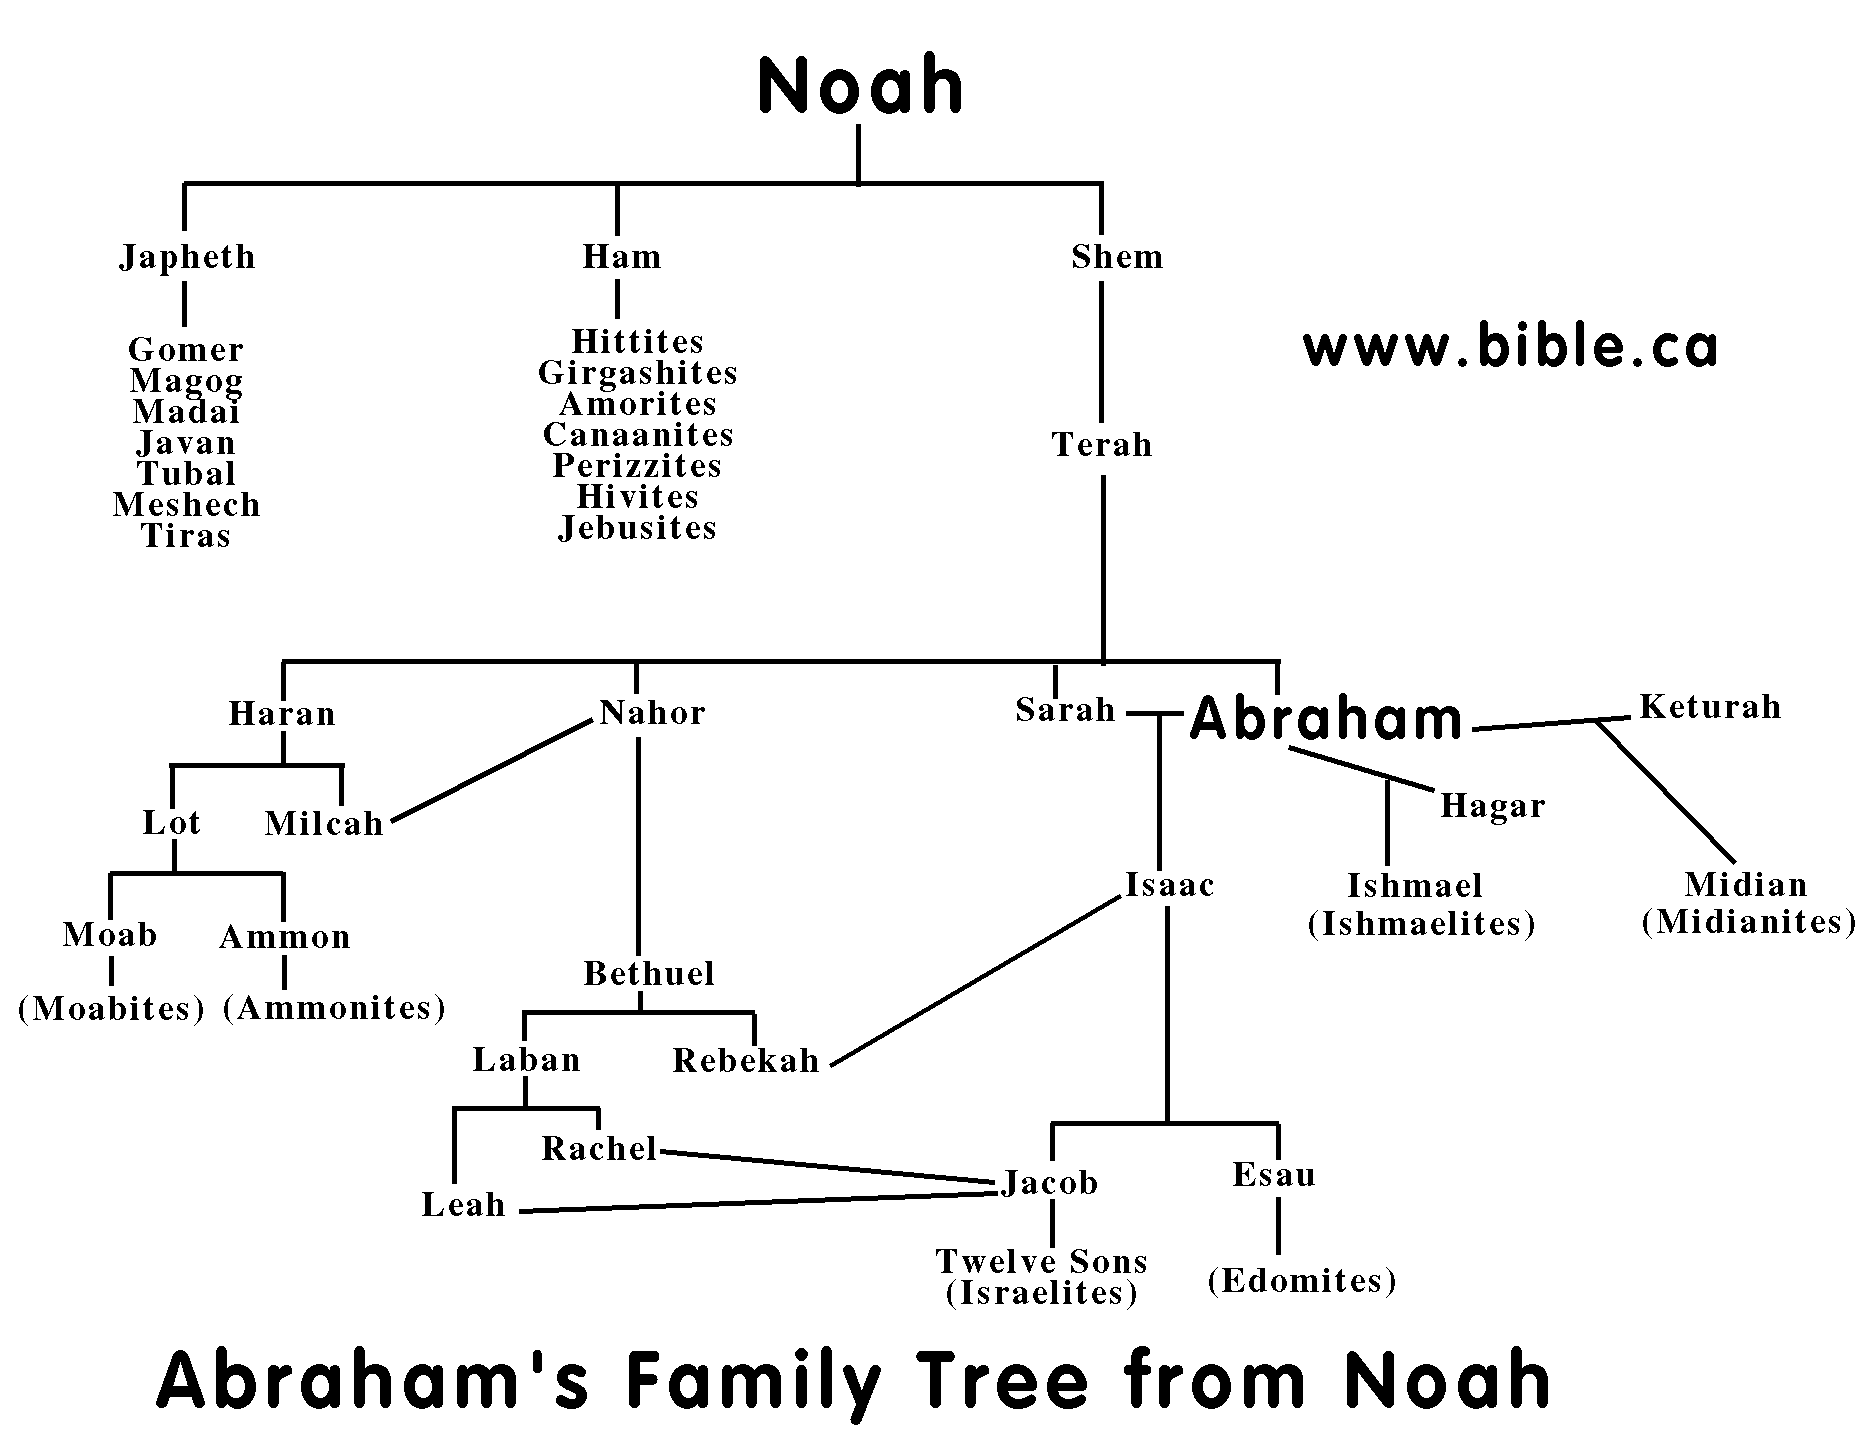 What is a biblical summary of the life of Abraham?